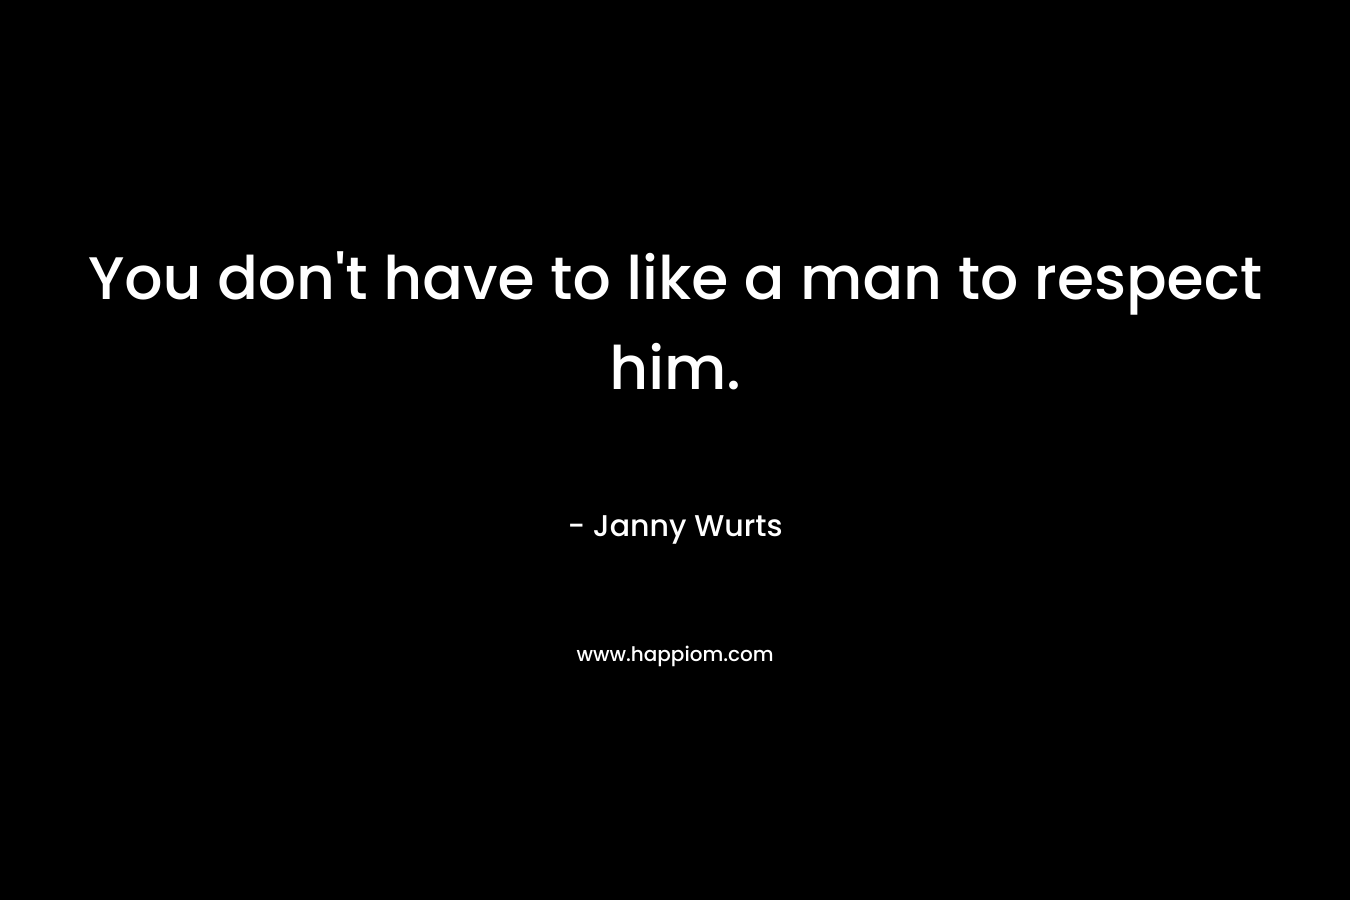 You don't have to like a man to respect him.